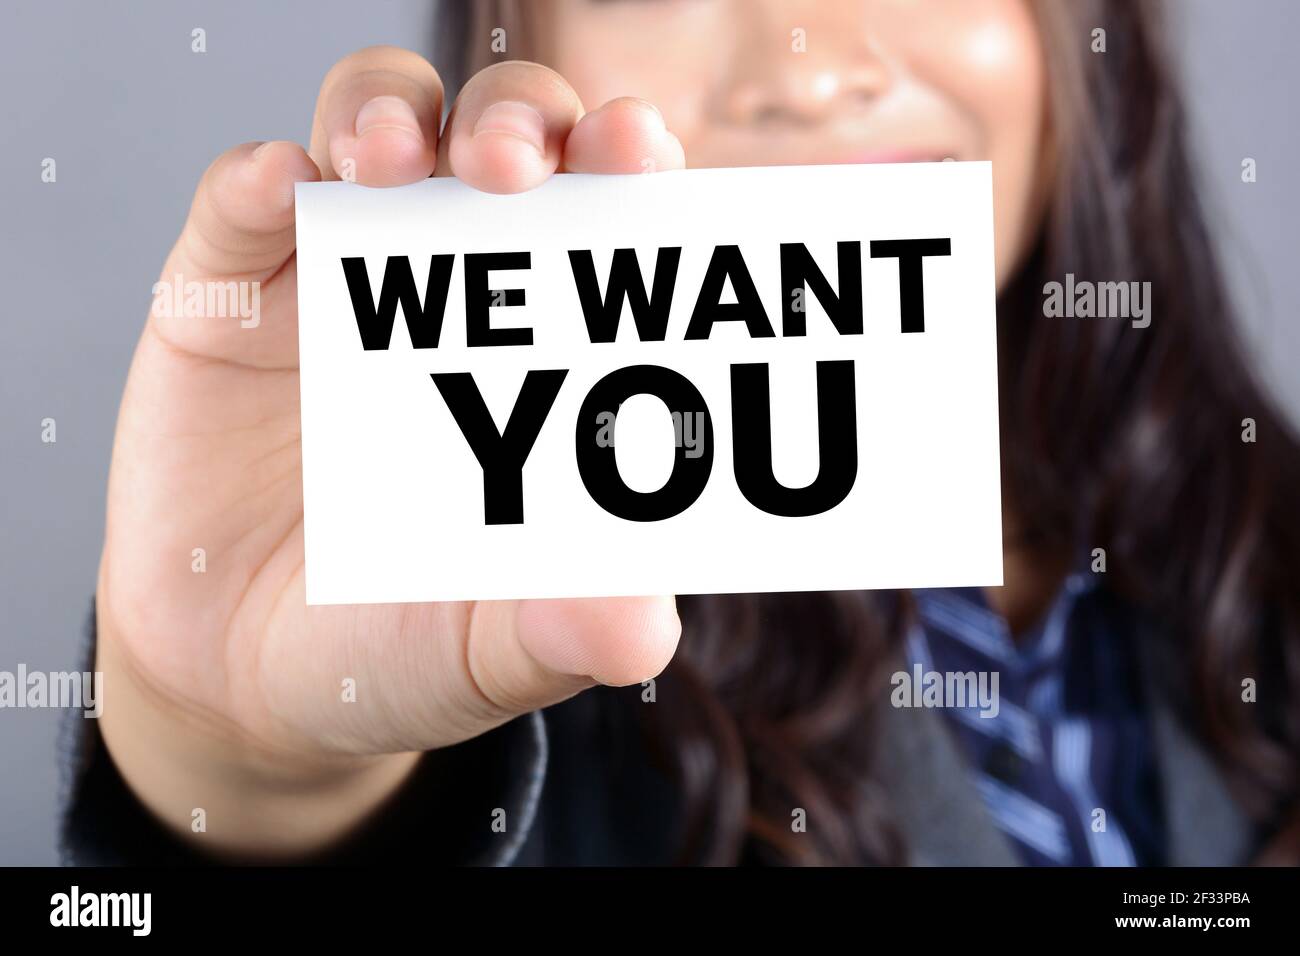 WE WANT YOU! message on the card shown by a businesswoman Stock Photo